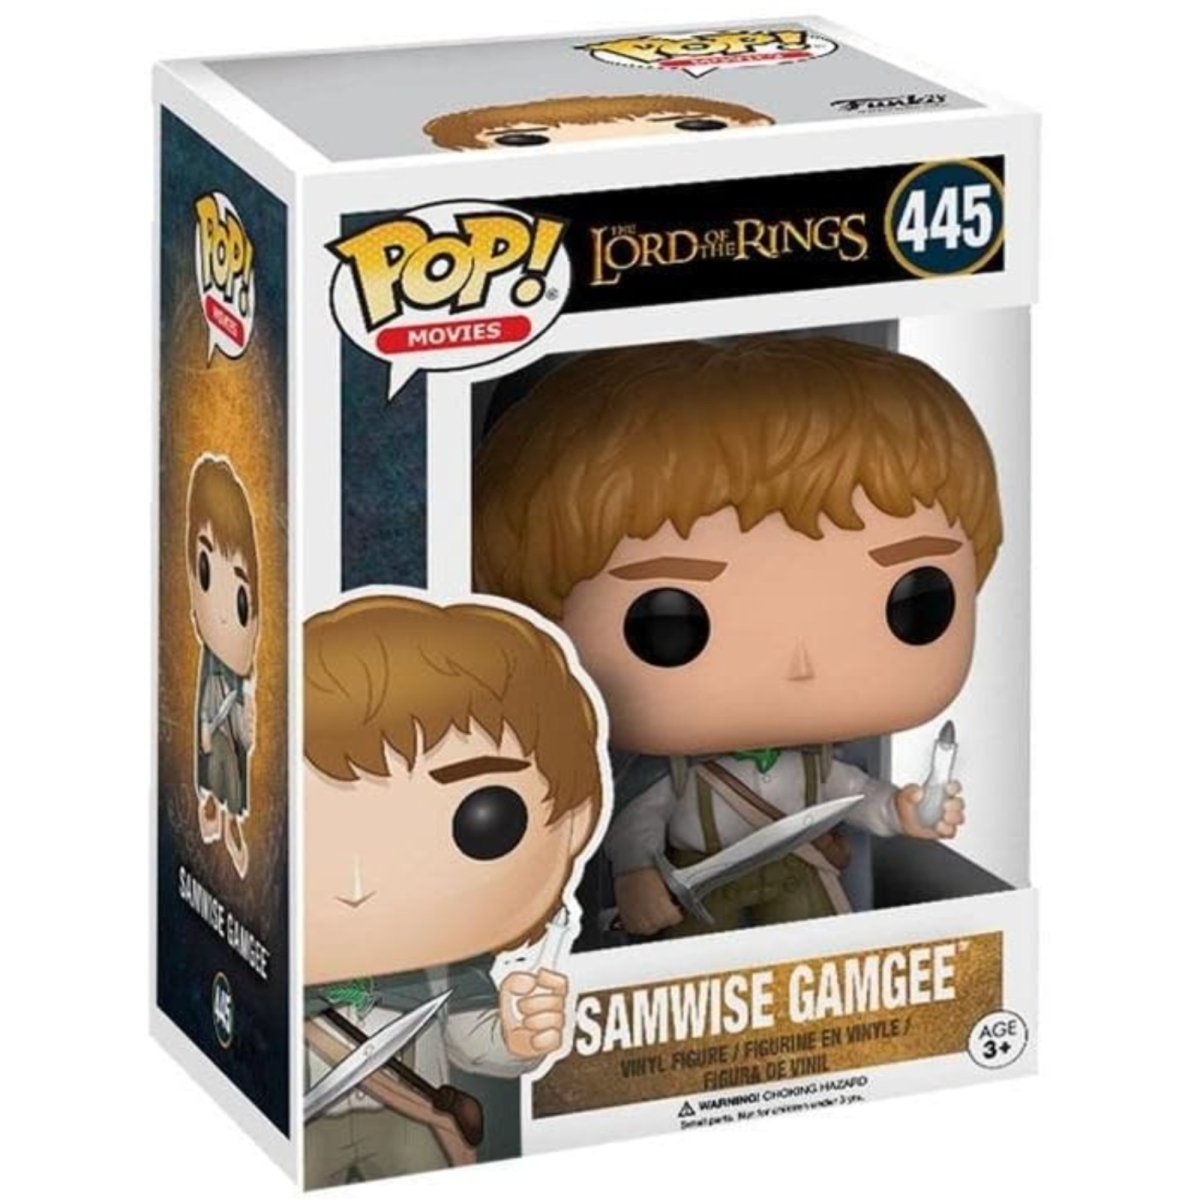 The Lord of the Rings - Samwise Gamgee #445 - Funko Pop! Vinyl Movies - Persona Toys